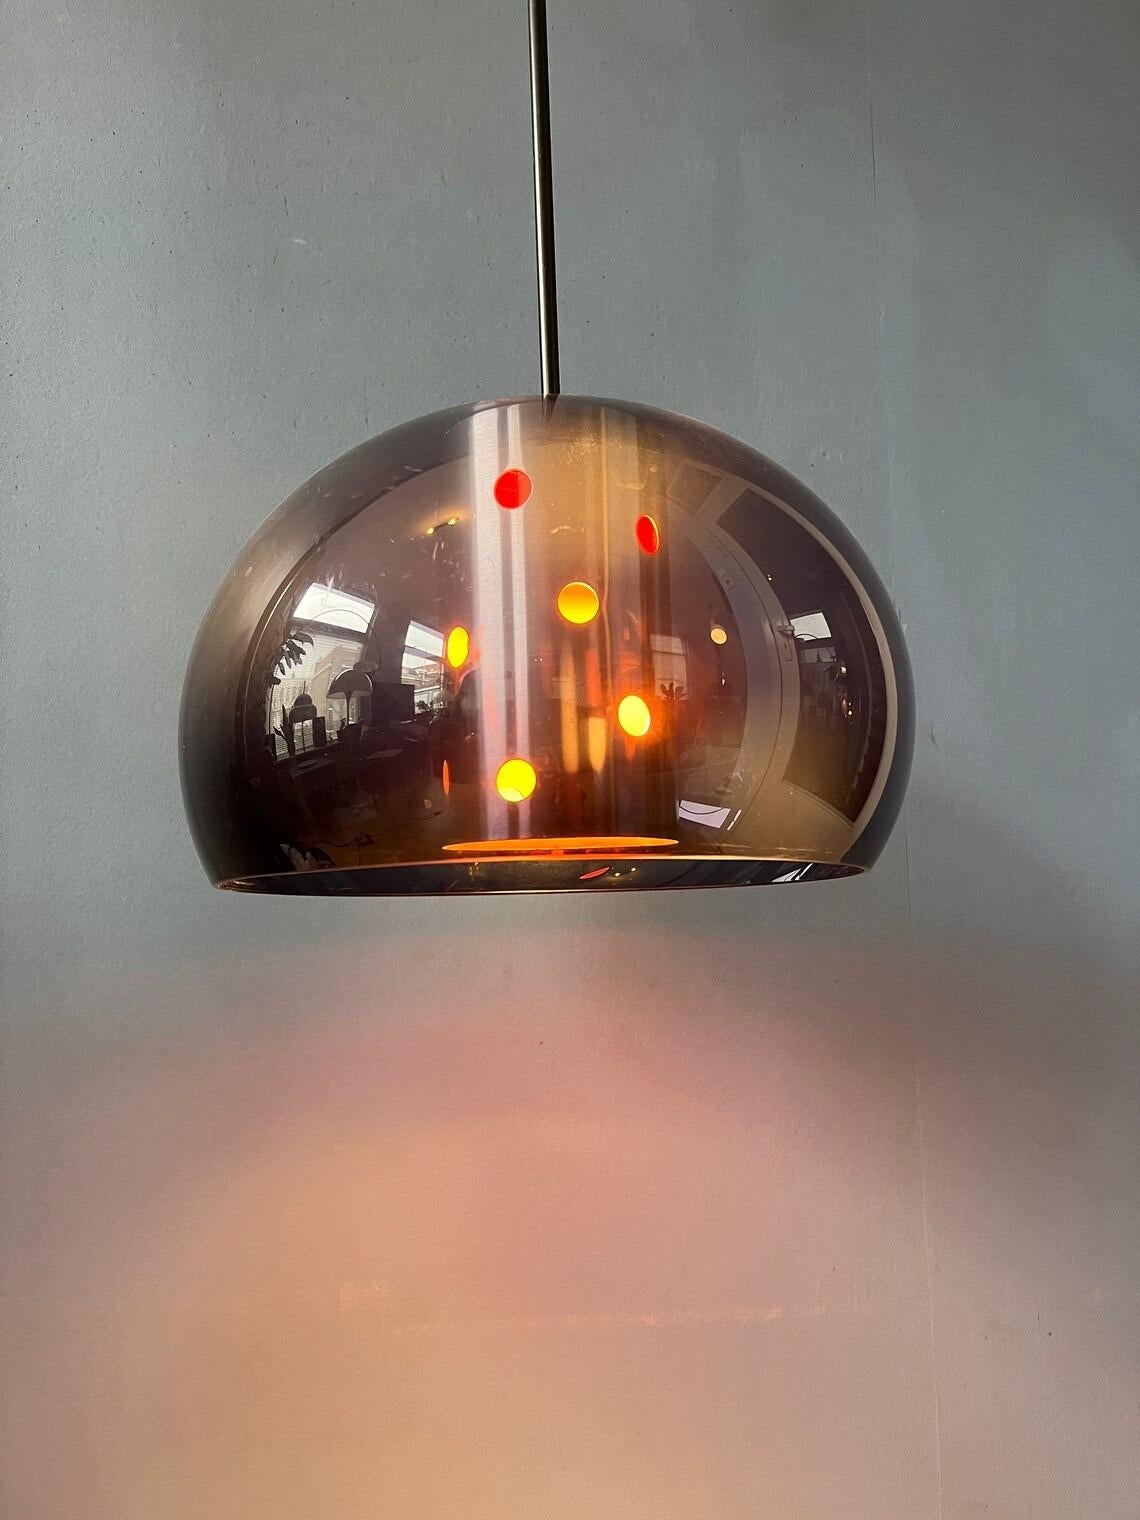 Mid century Herda space age pendant lamp with purple/blue mushroom shade and 'disco' light. The lamp has an acrylic glass outer shade and aluminium inner shade. Together they produce a nice 'disco' light. The lamp requires one E27/26